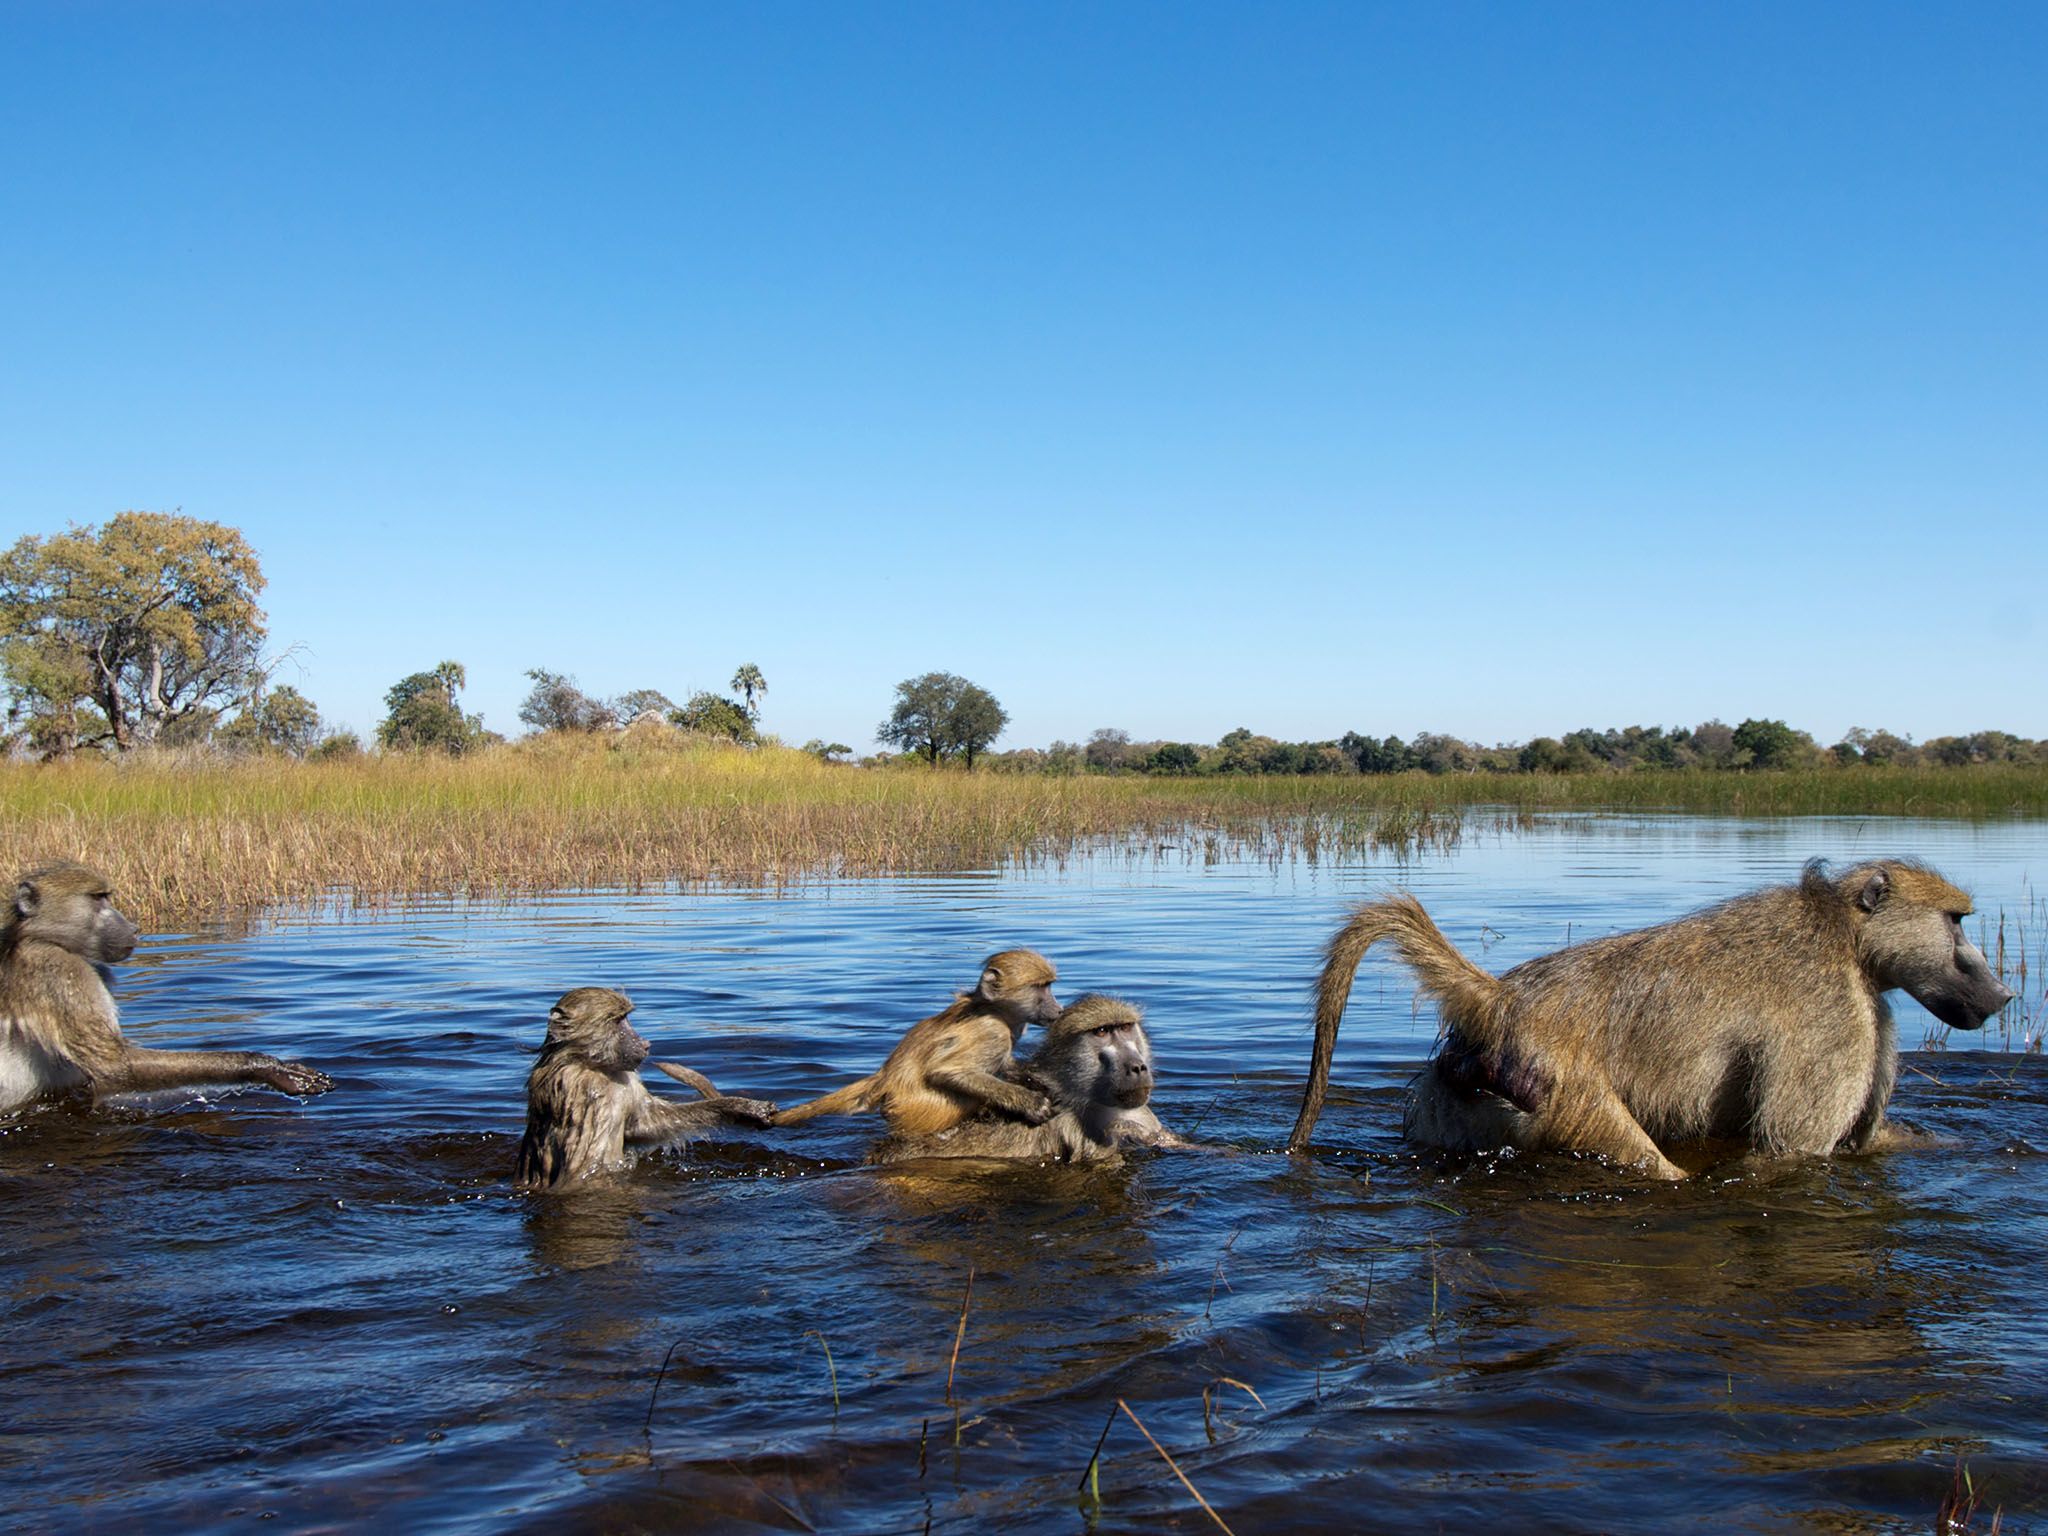 Moremi Game Reserve, Ngamiland, Botswana: A troop of chacma baboons crosses a flooded plain in... [Photo of the day - May 2016]